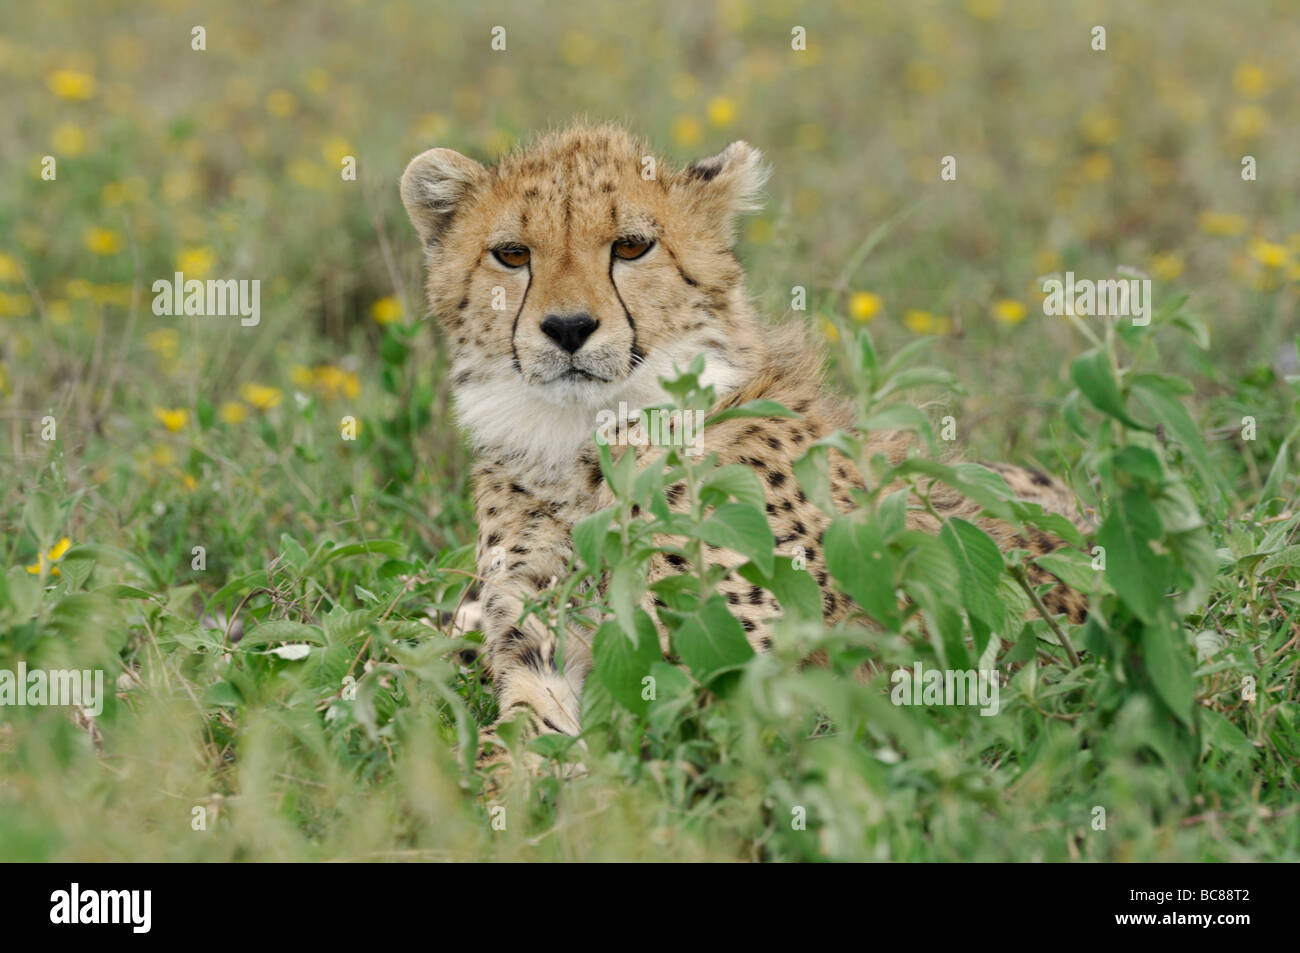 Stock photo of a young cheetah resting in th grass, Serengeti National Park, Tanzania, February 2009. Stock Photo